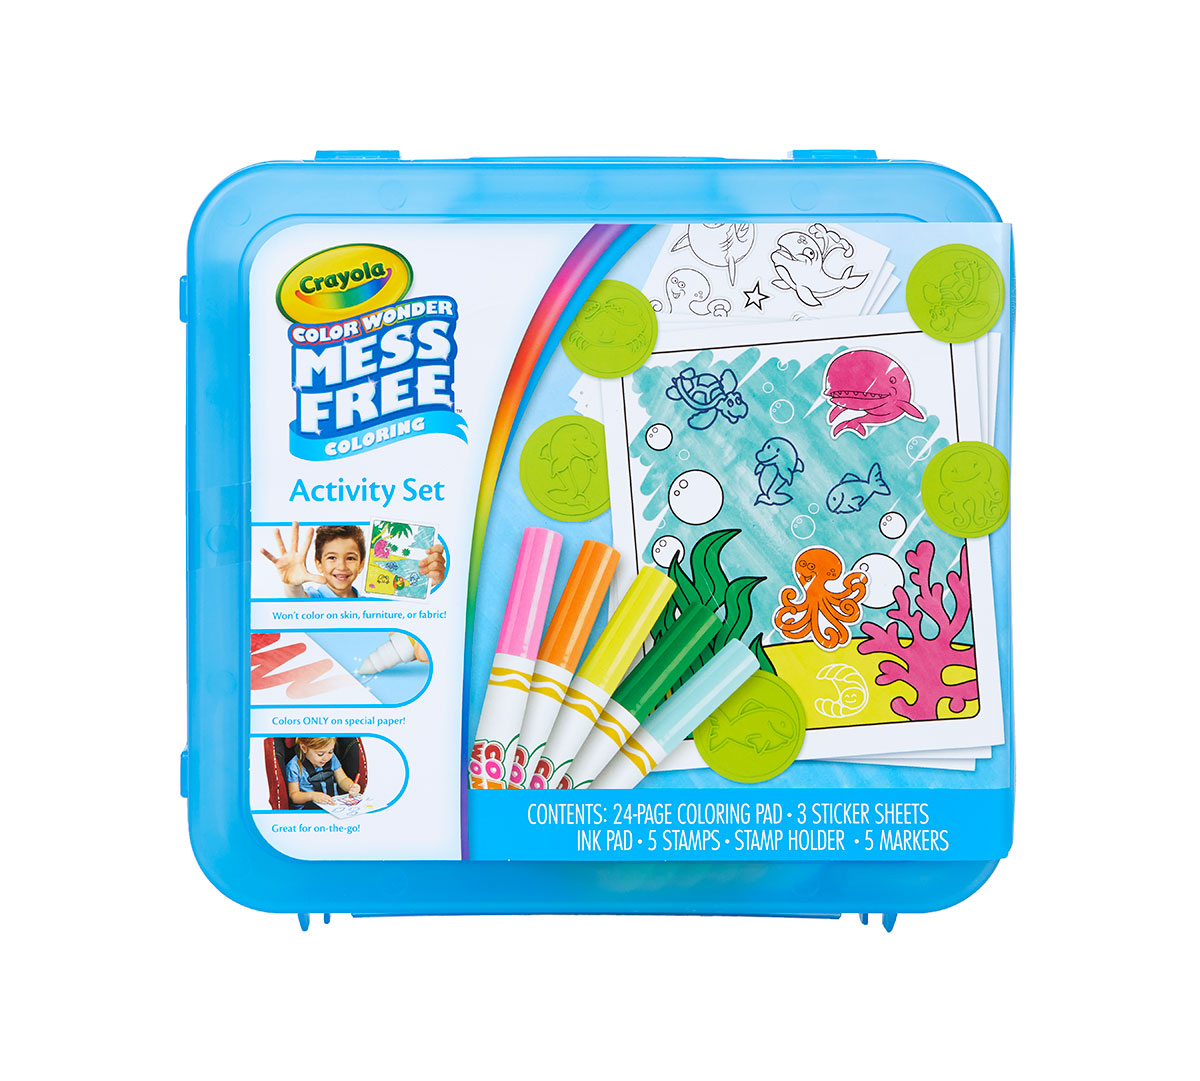 HD Coloring Kit - Coloring Set for Adults, Crayola.com